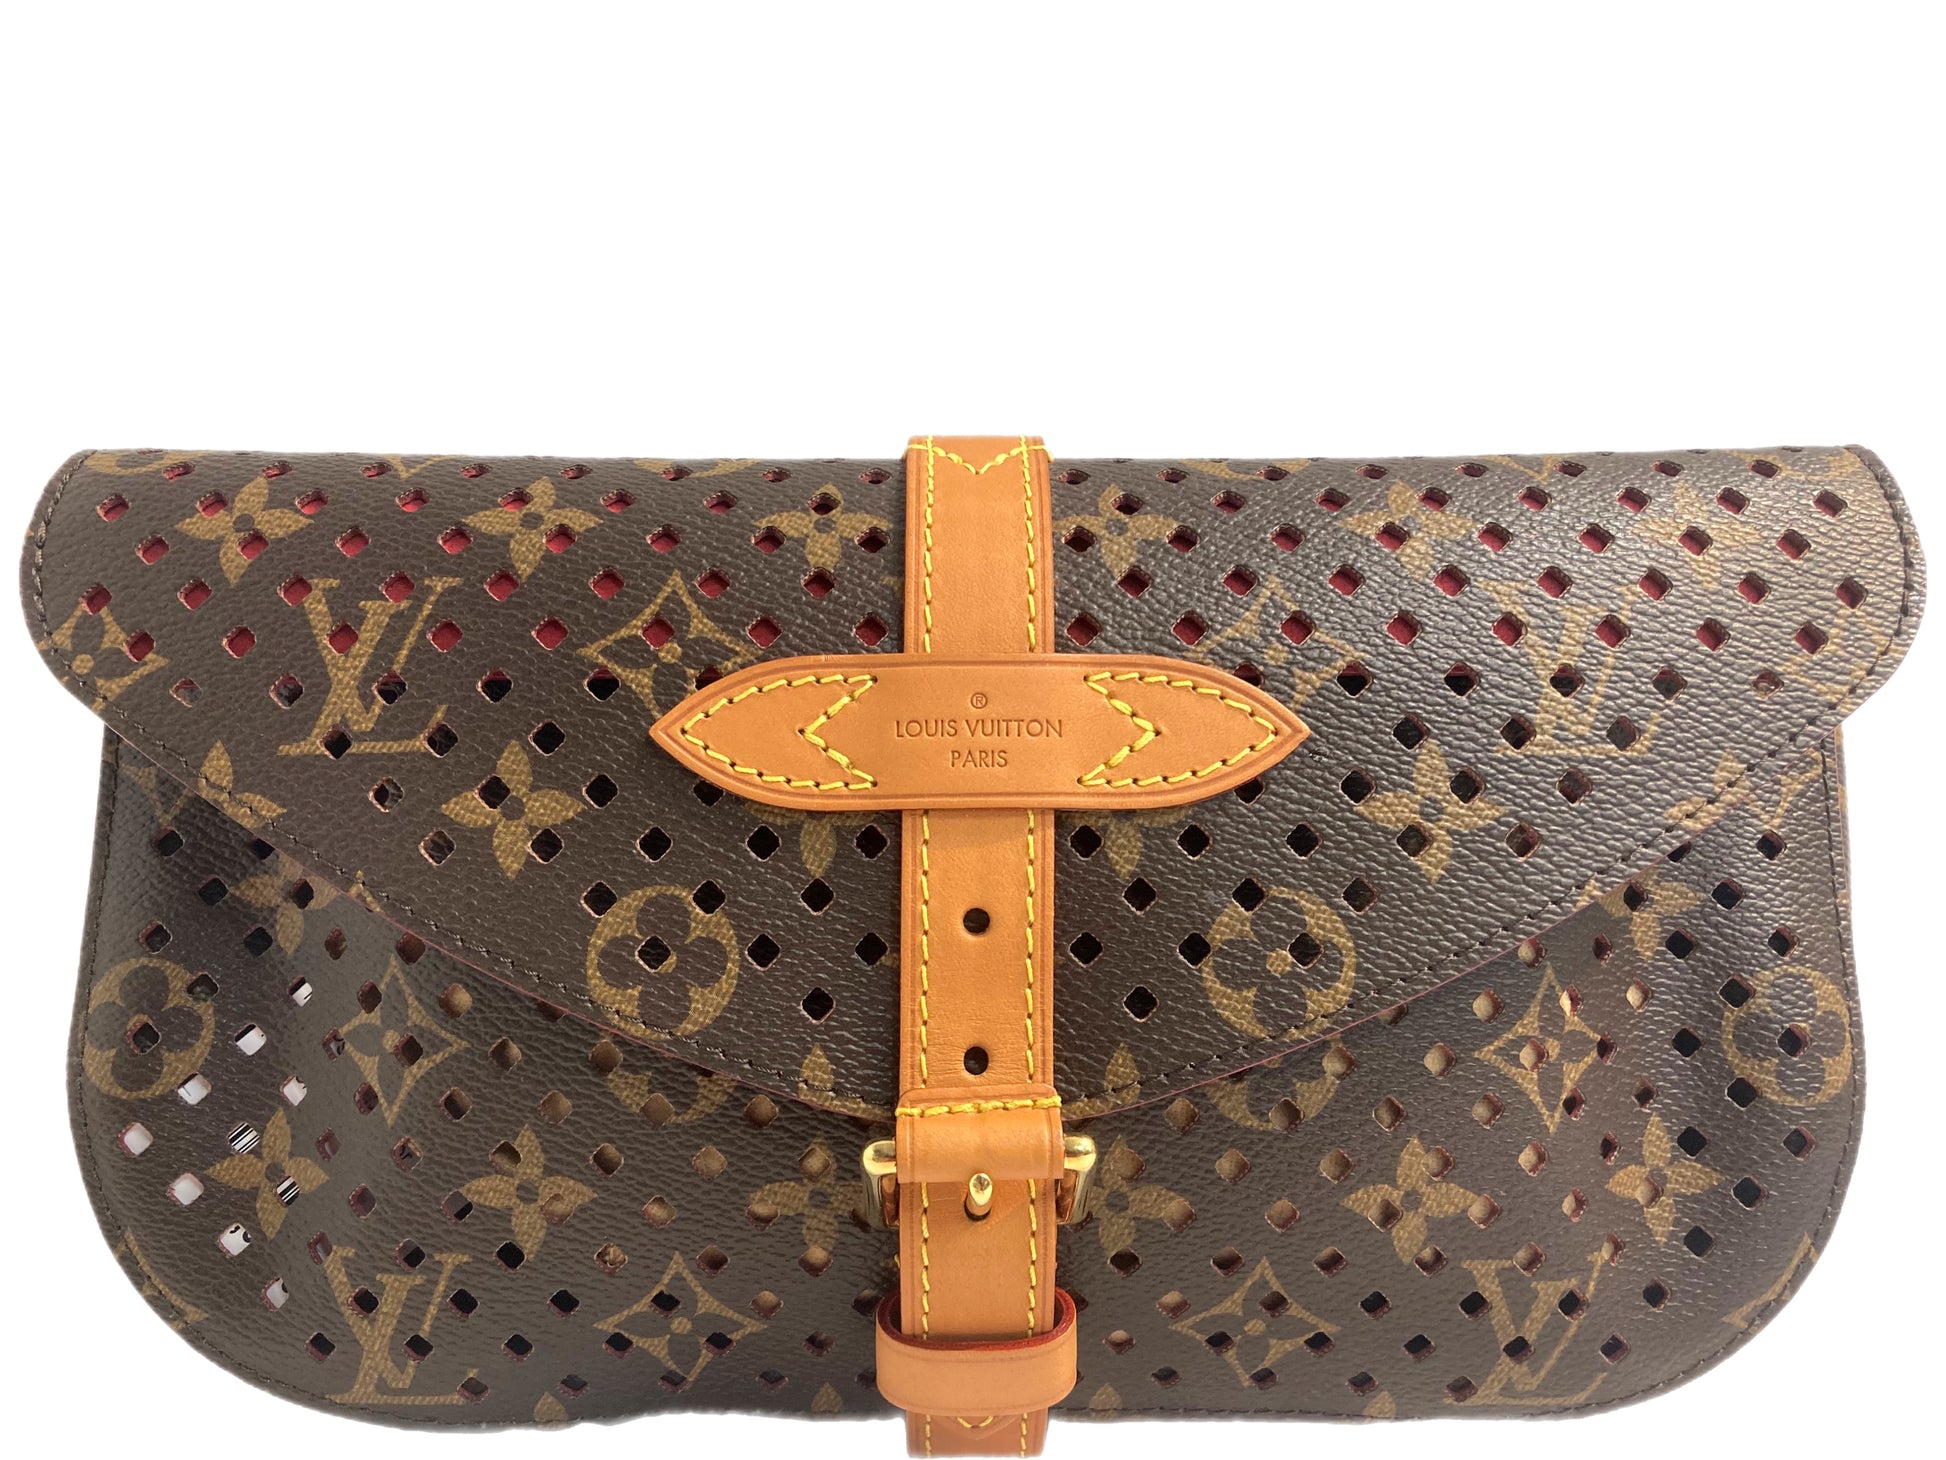 Louis Vuitton red perforated Monogram pre-owned leather case.